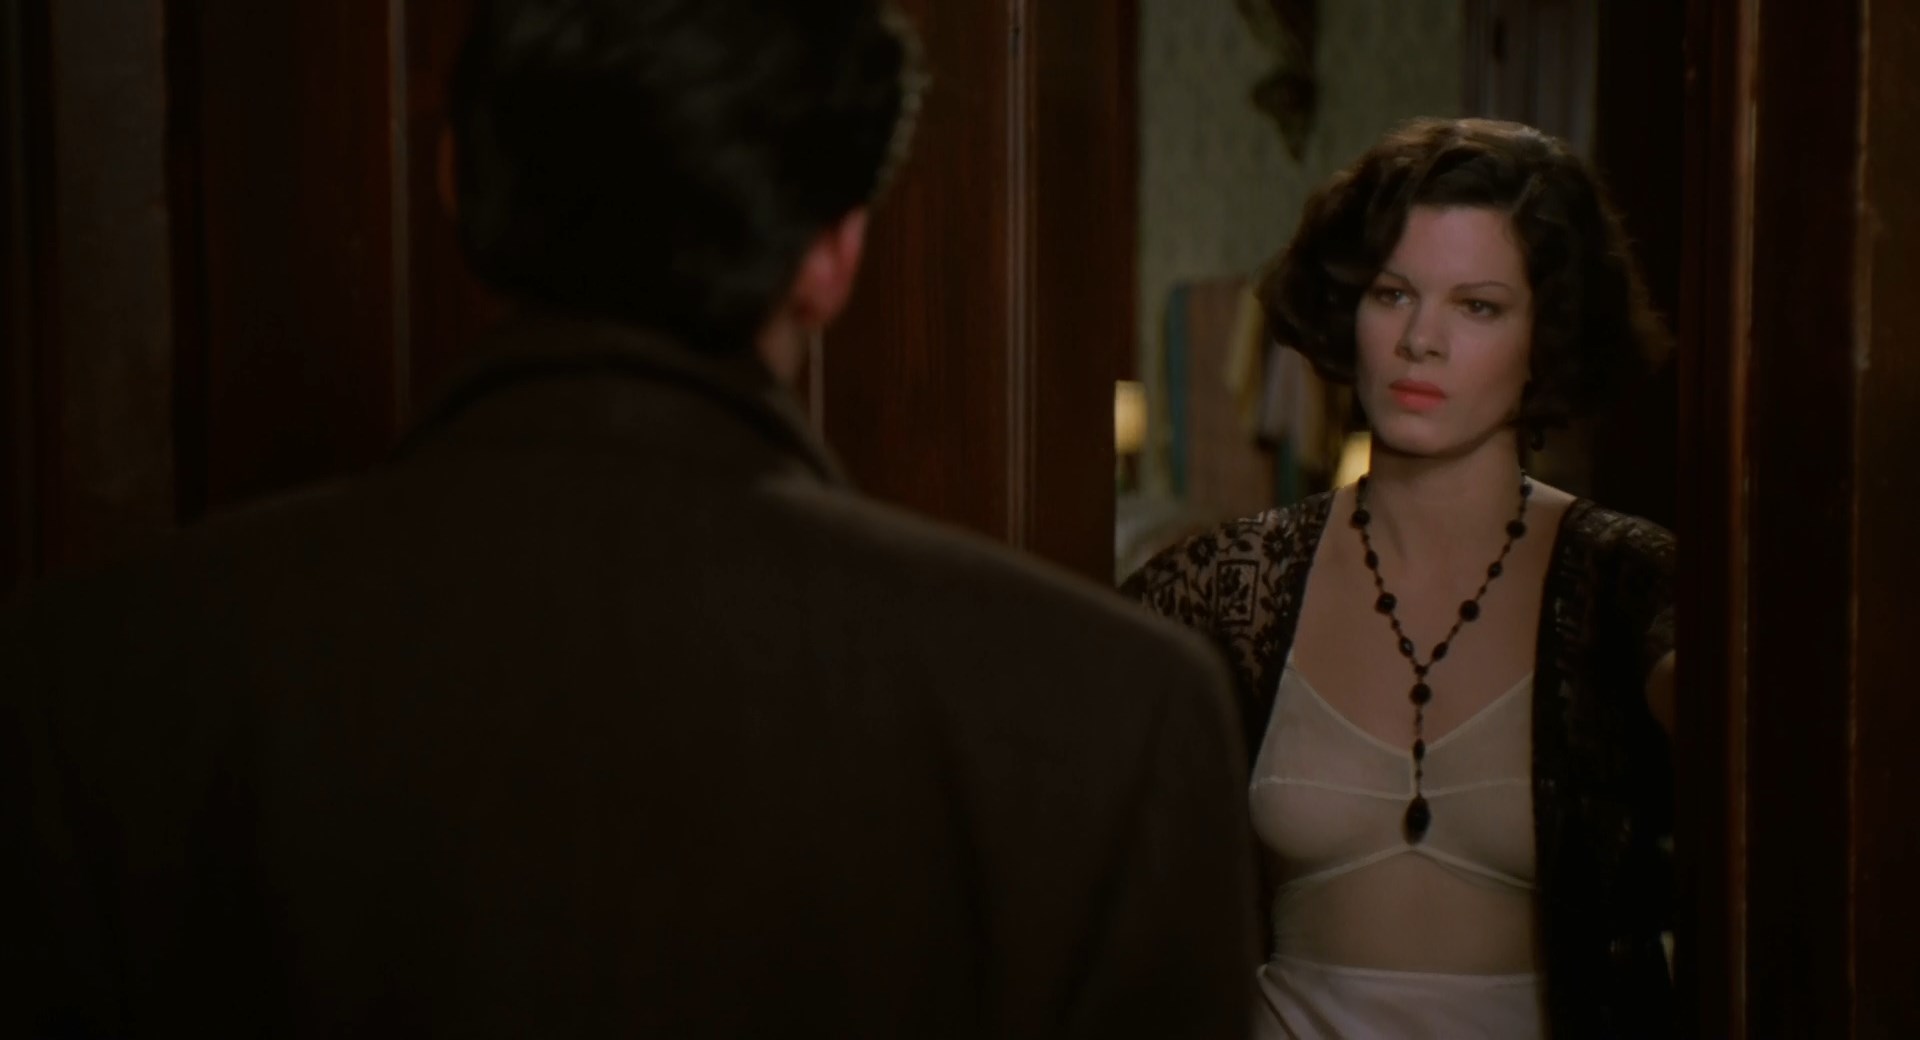 Marcia Gay Harden is looking sexy in the movie “Miller's Crossing” whi...